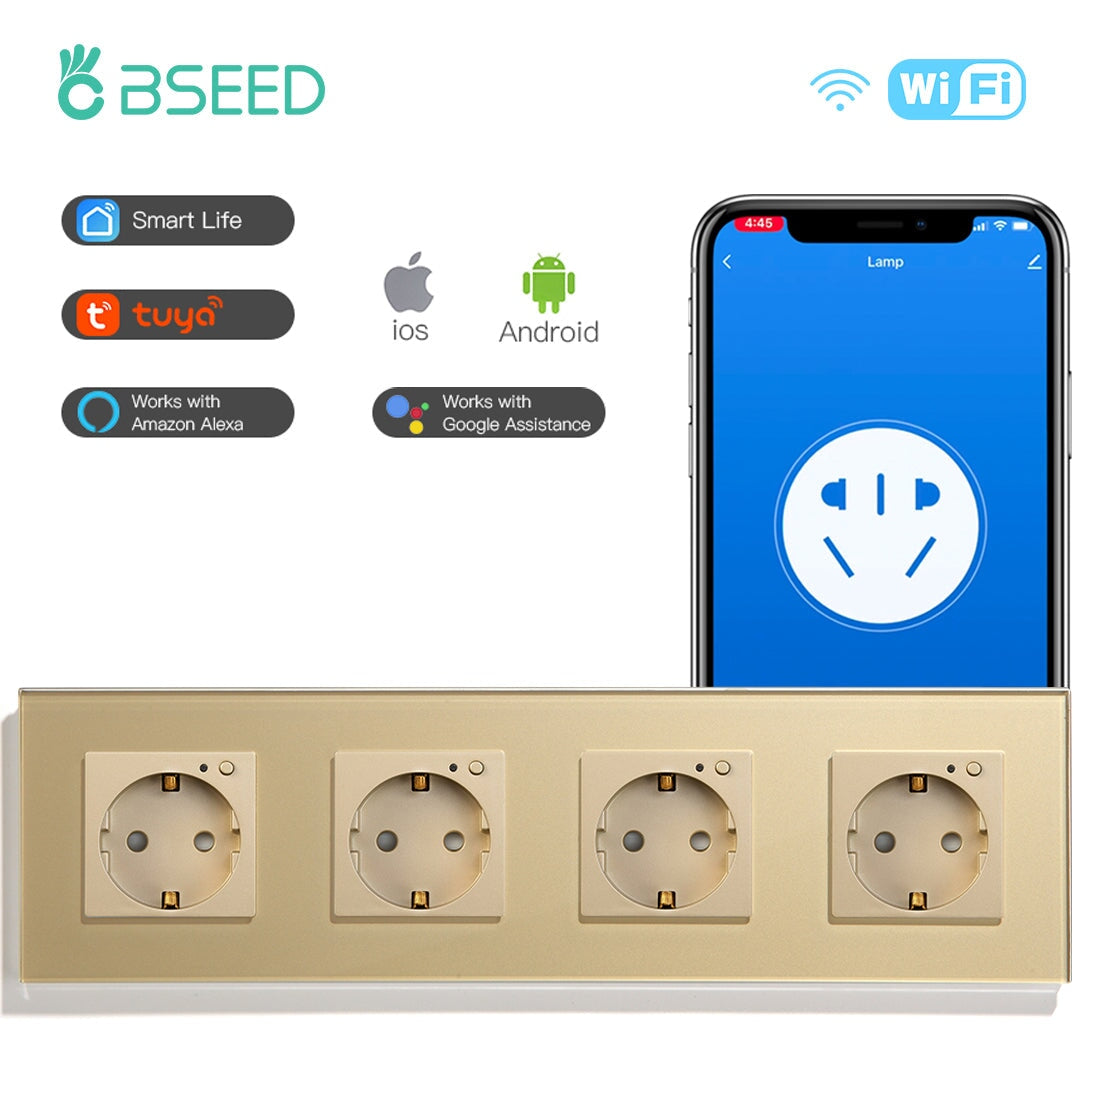 BSEED Wifi EU Wall Sockets Single Power Outlets Kids Protection Wall Plates & Covers Bseedswitch golden Quadruple 